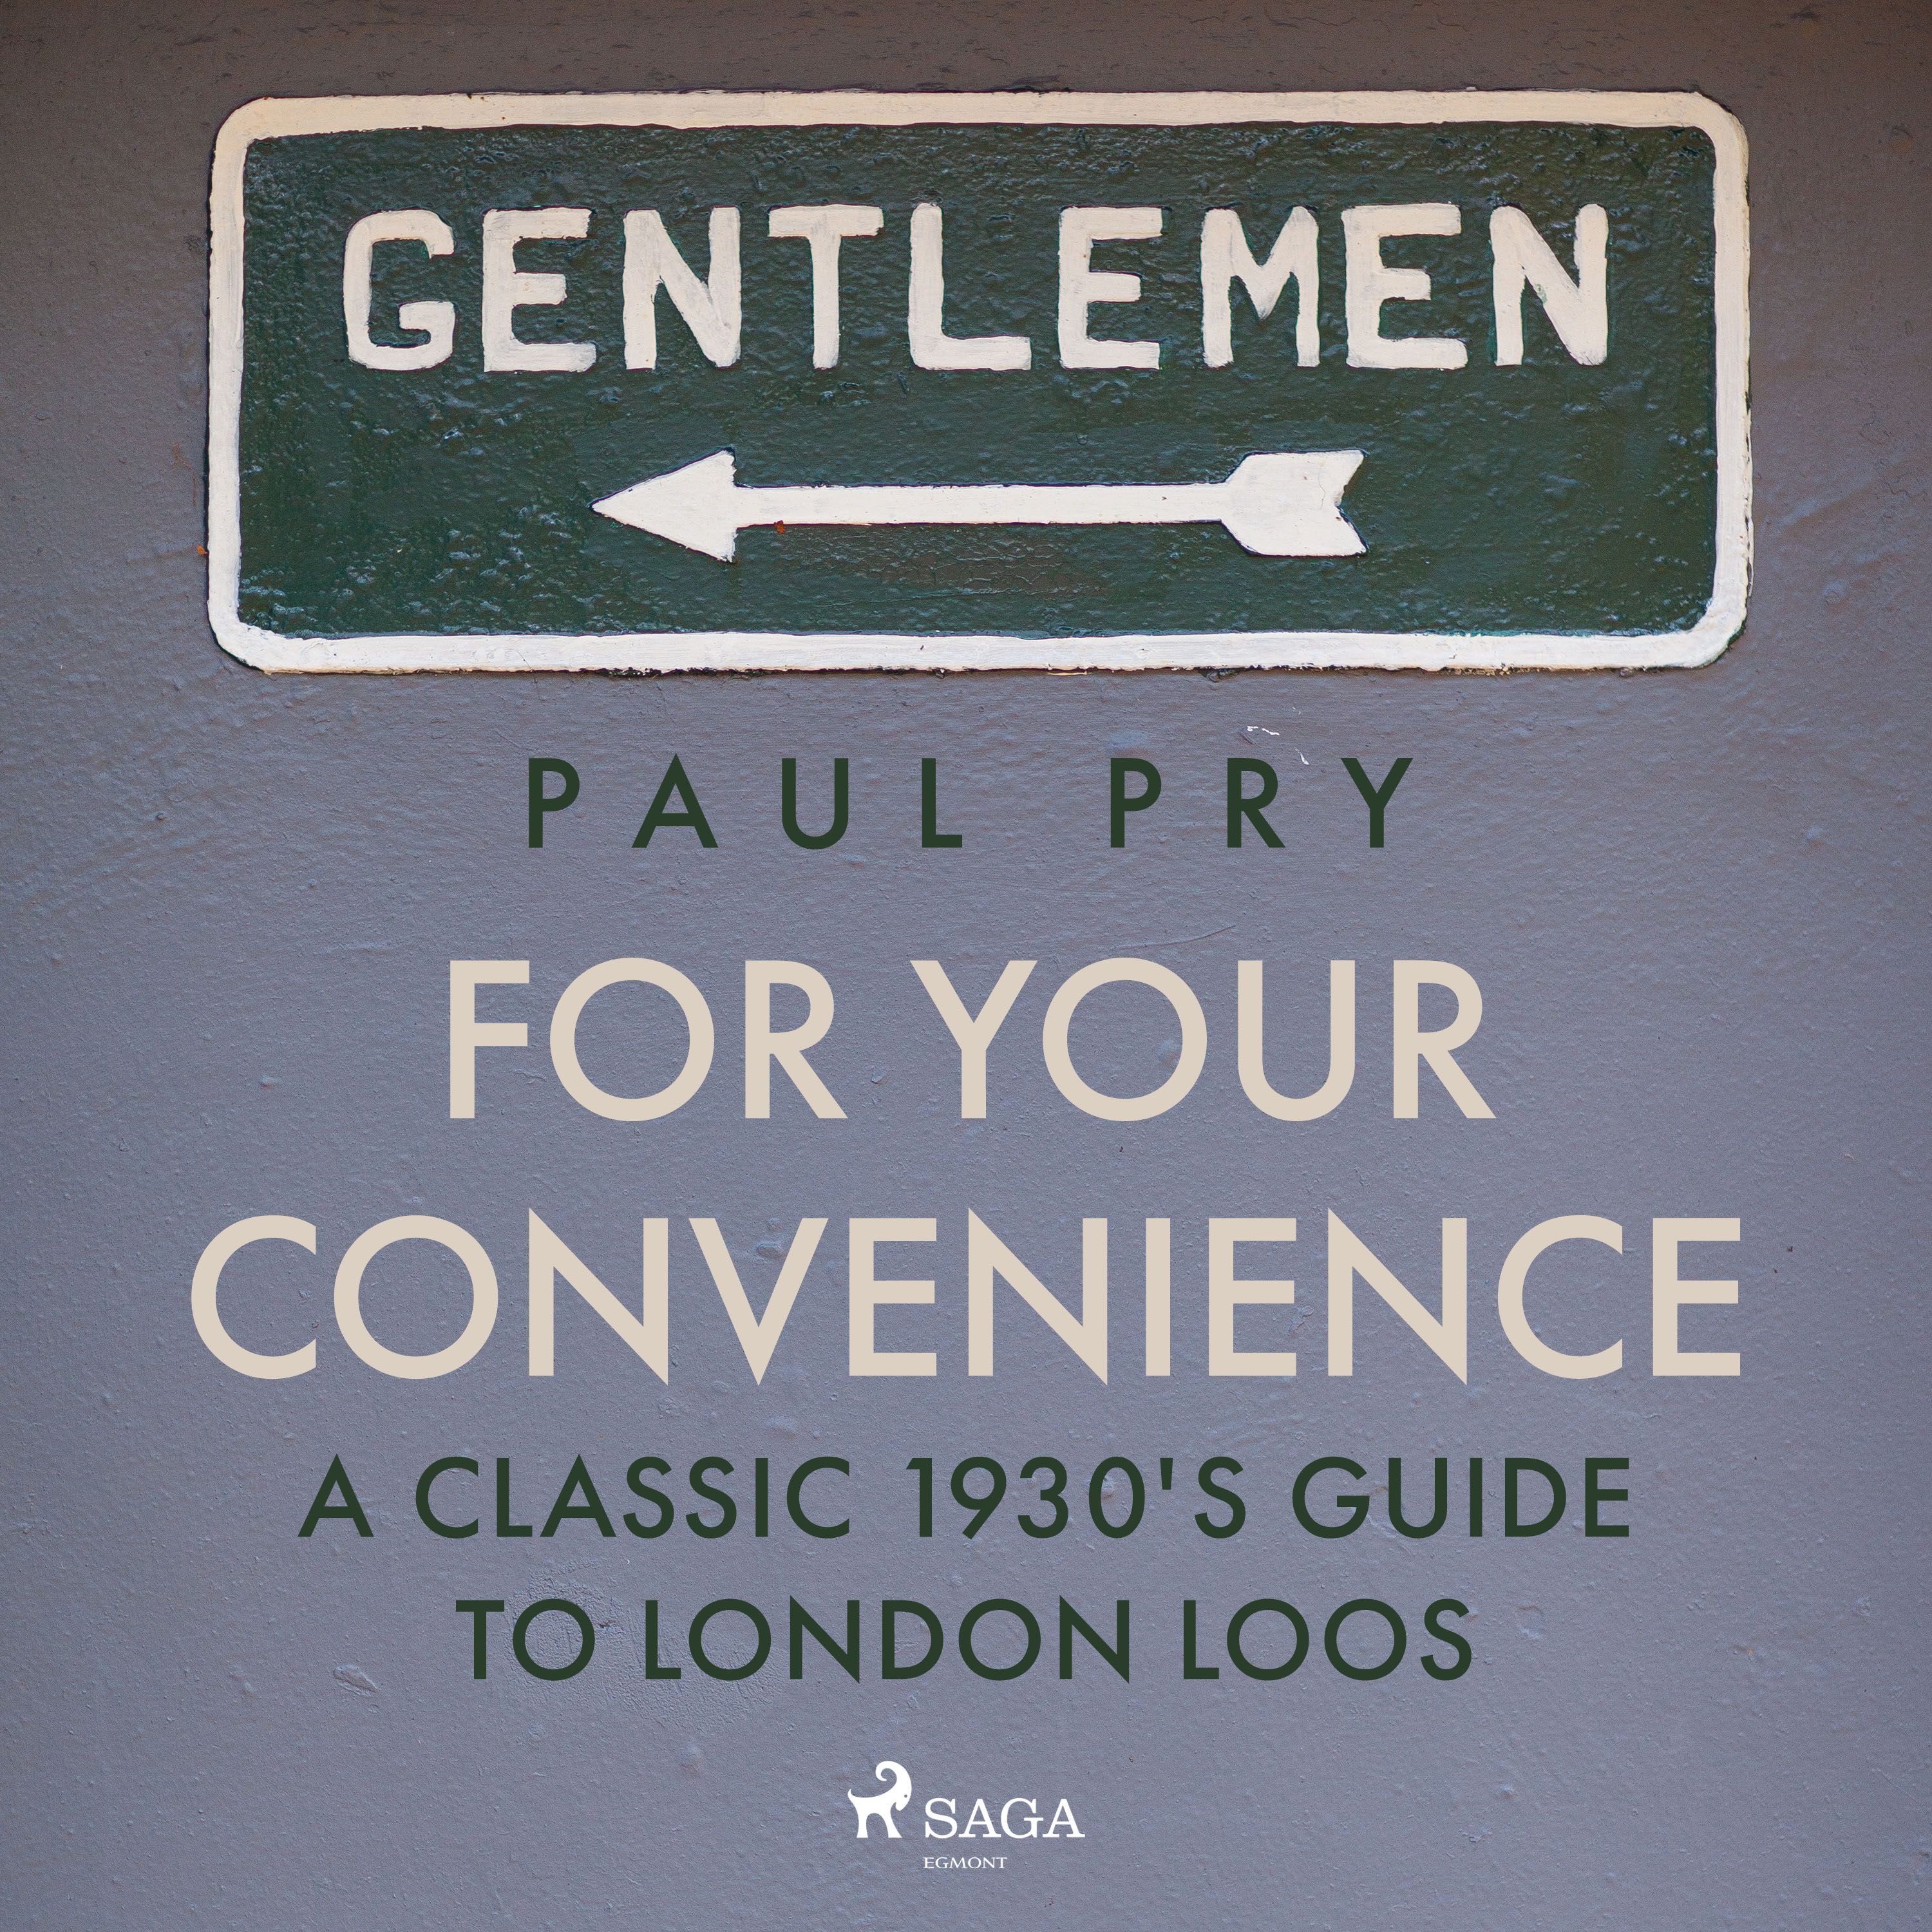 For Your Convenience - A CLASSIC 1930'S GUIDE TO LONDON LOOS, audiobook by Paul Pry